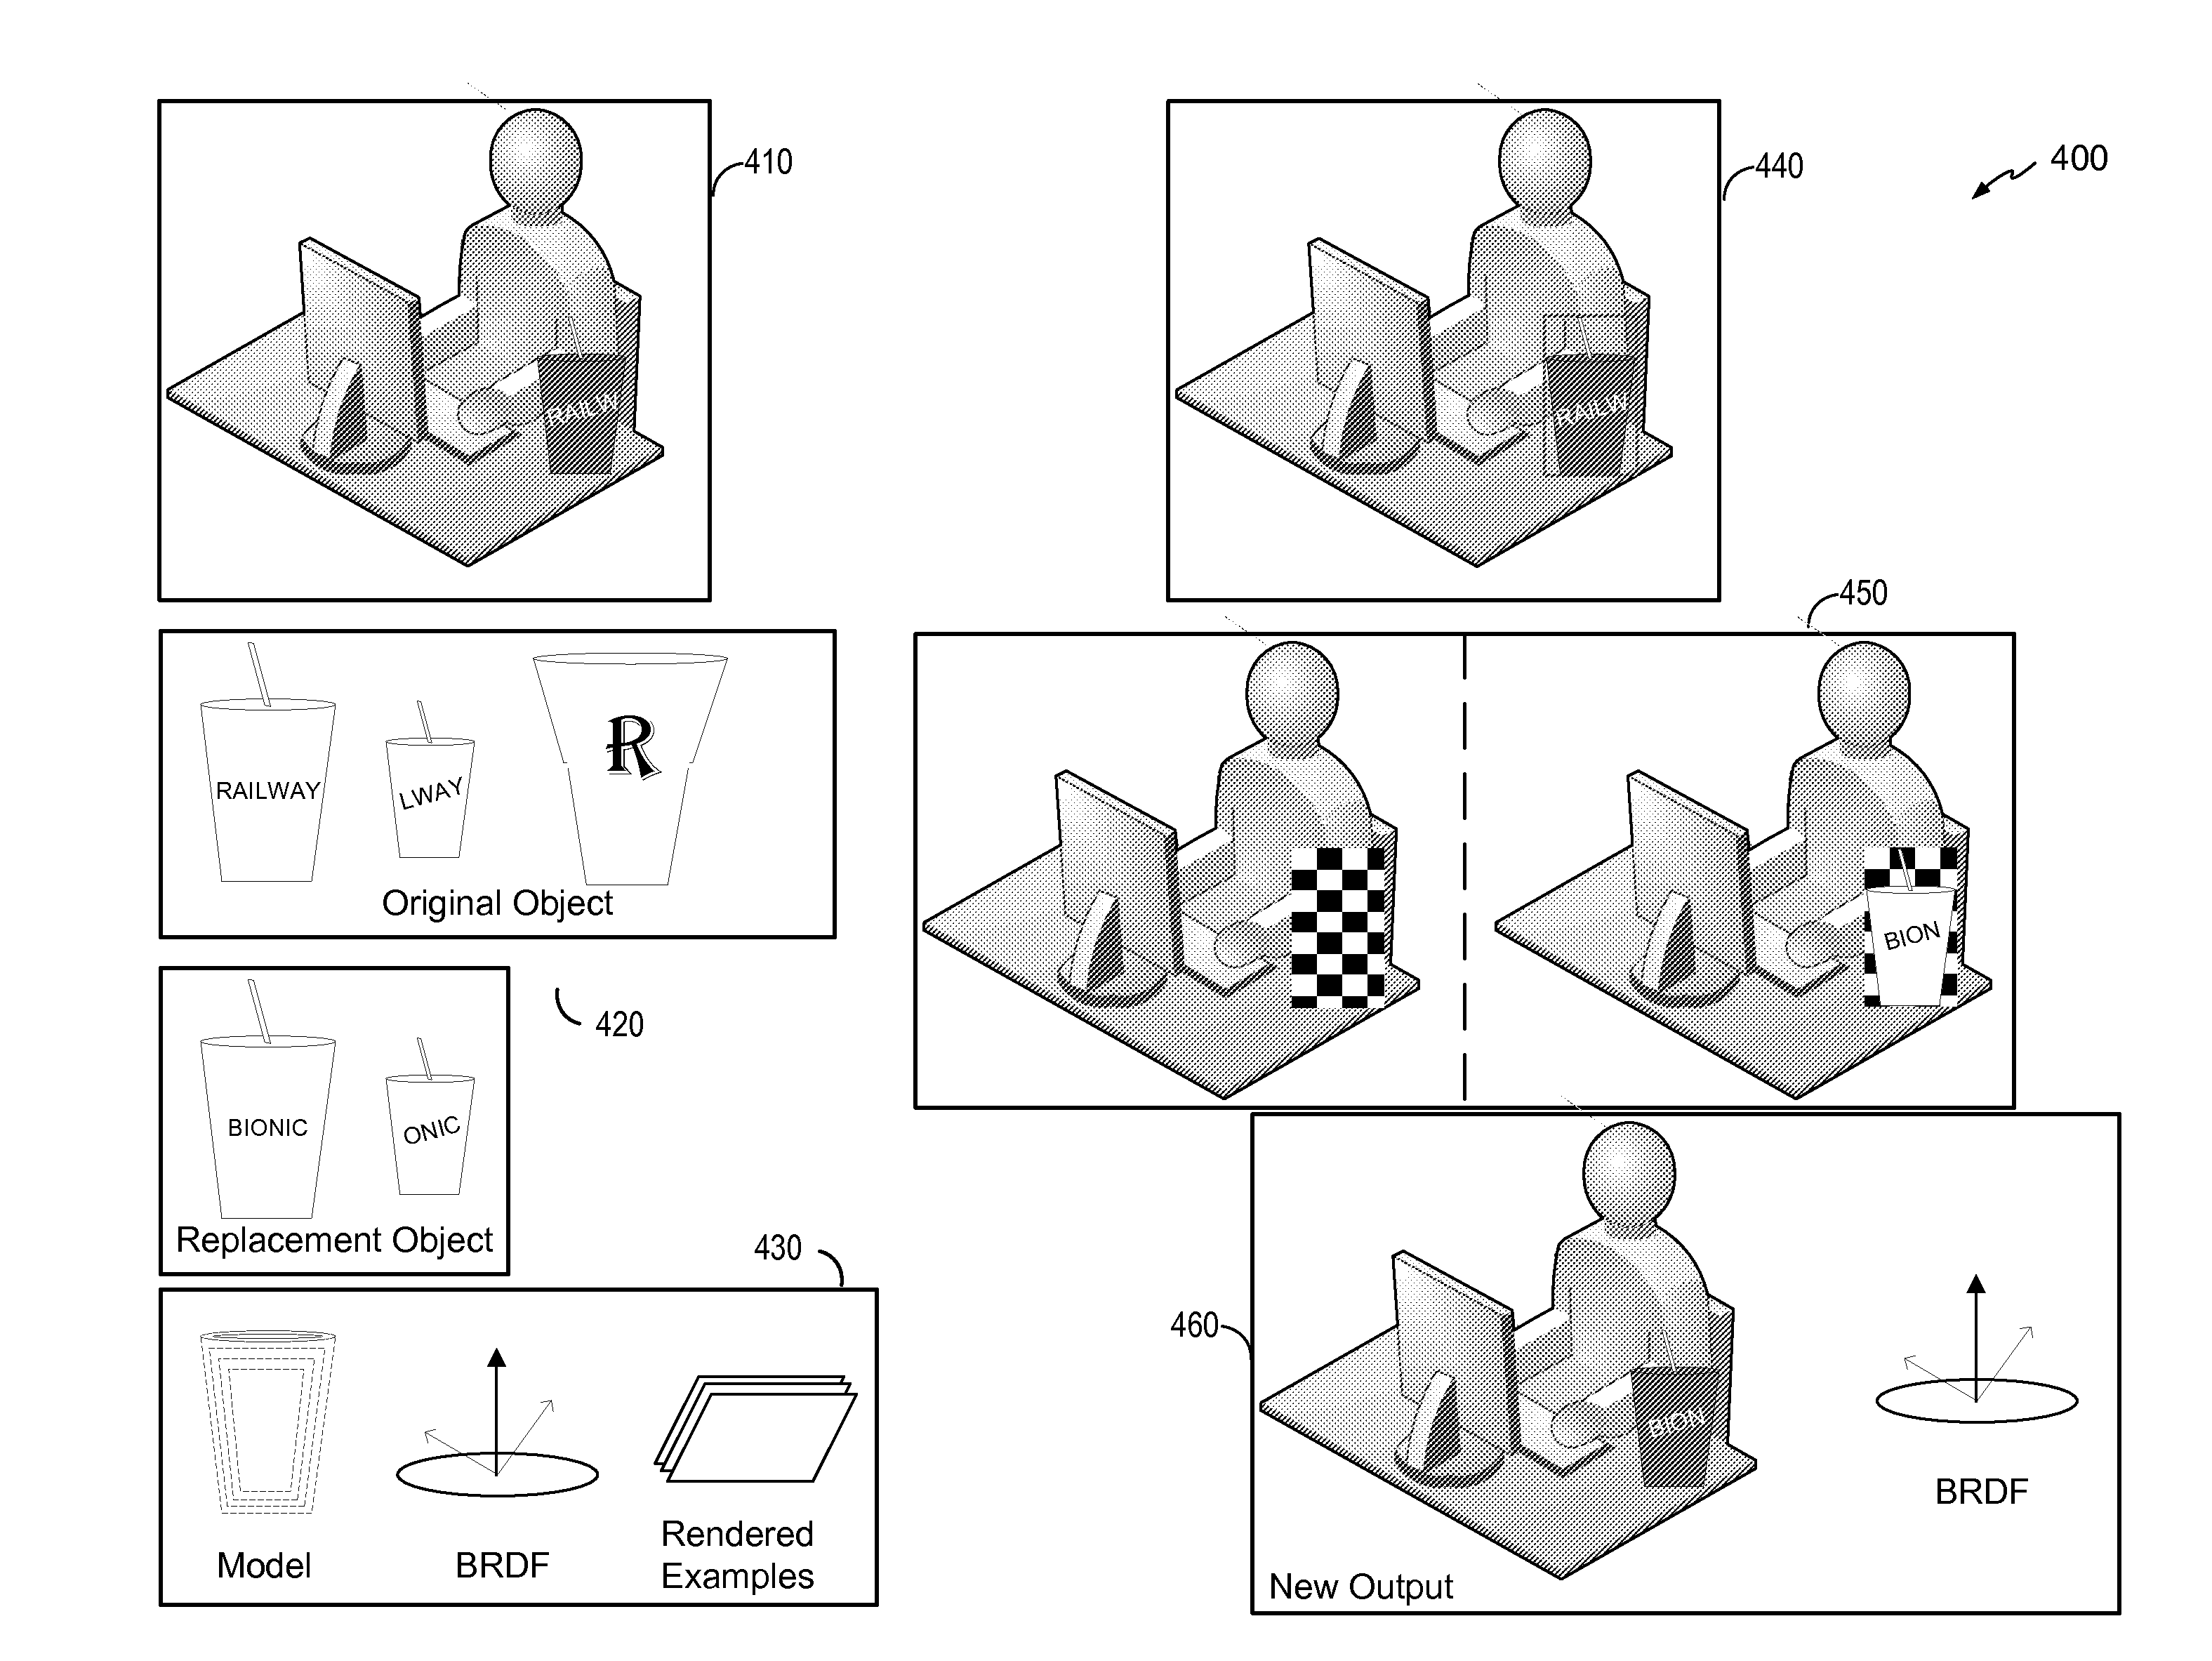 System and Method to Digitally Replace Objects in Images or Video